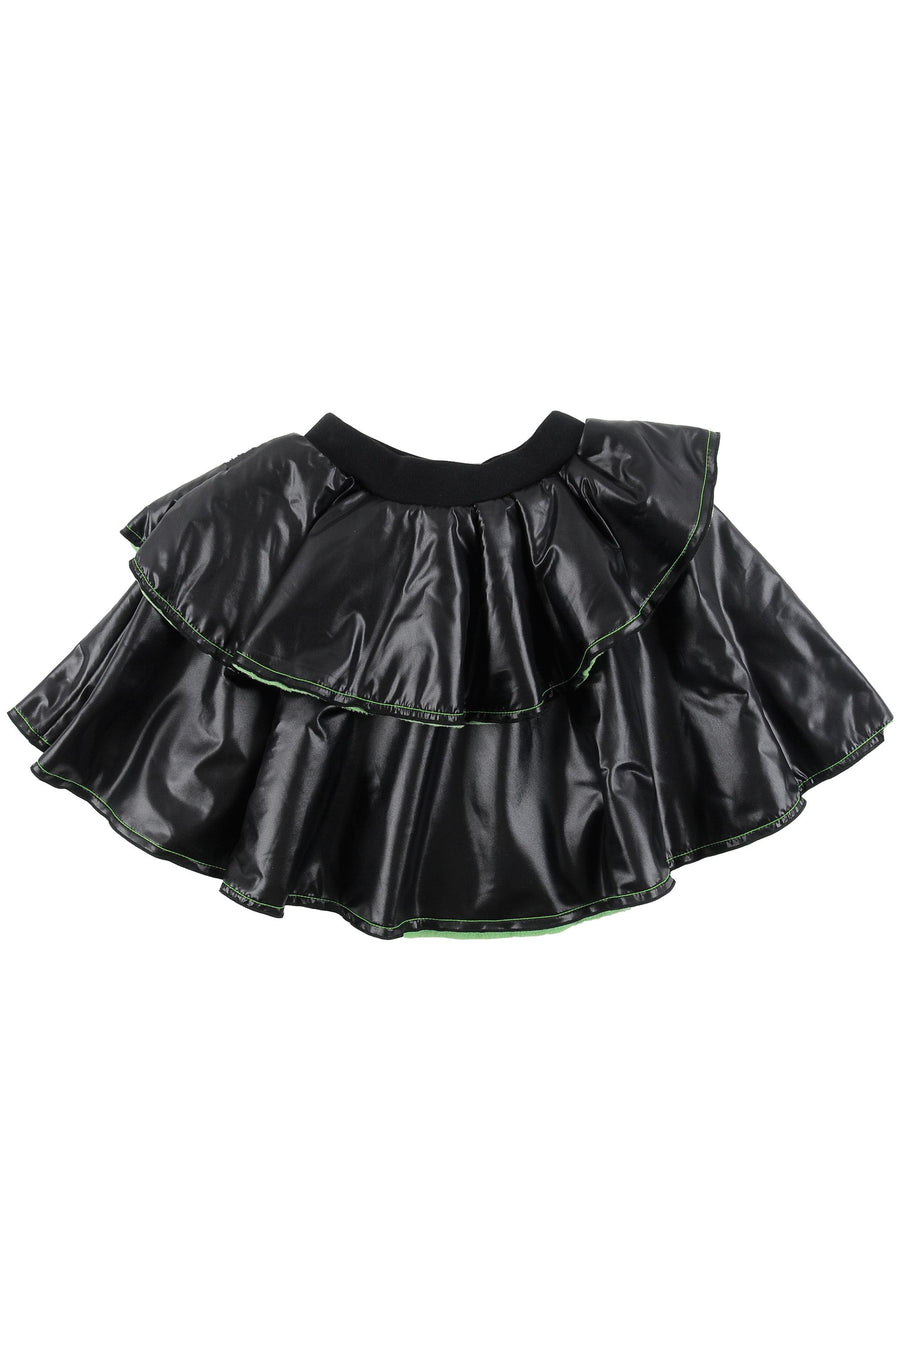 Black and Green Skirt by Loud